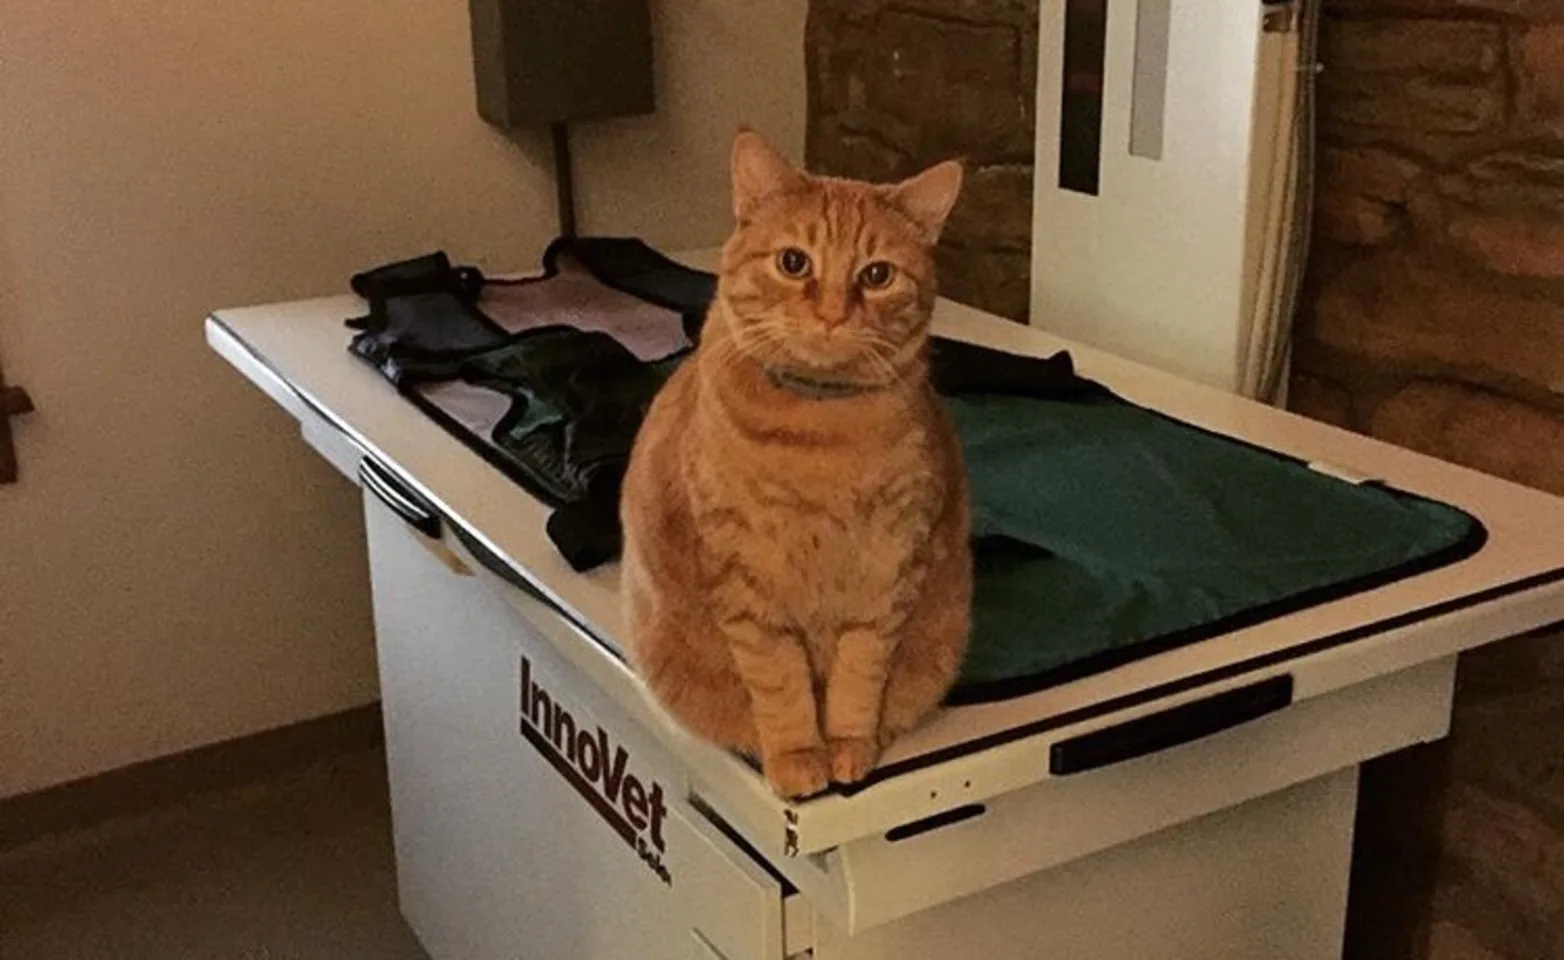 Harry the cat sitting on the radiology table